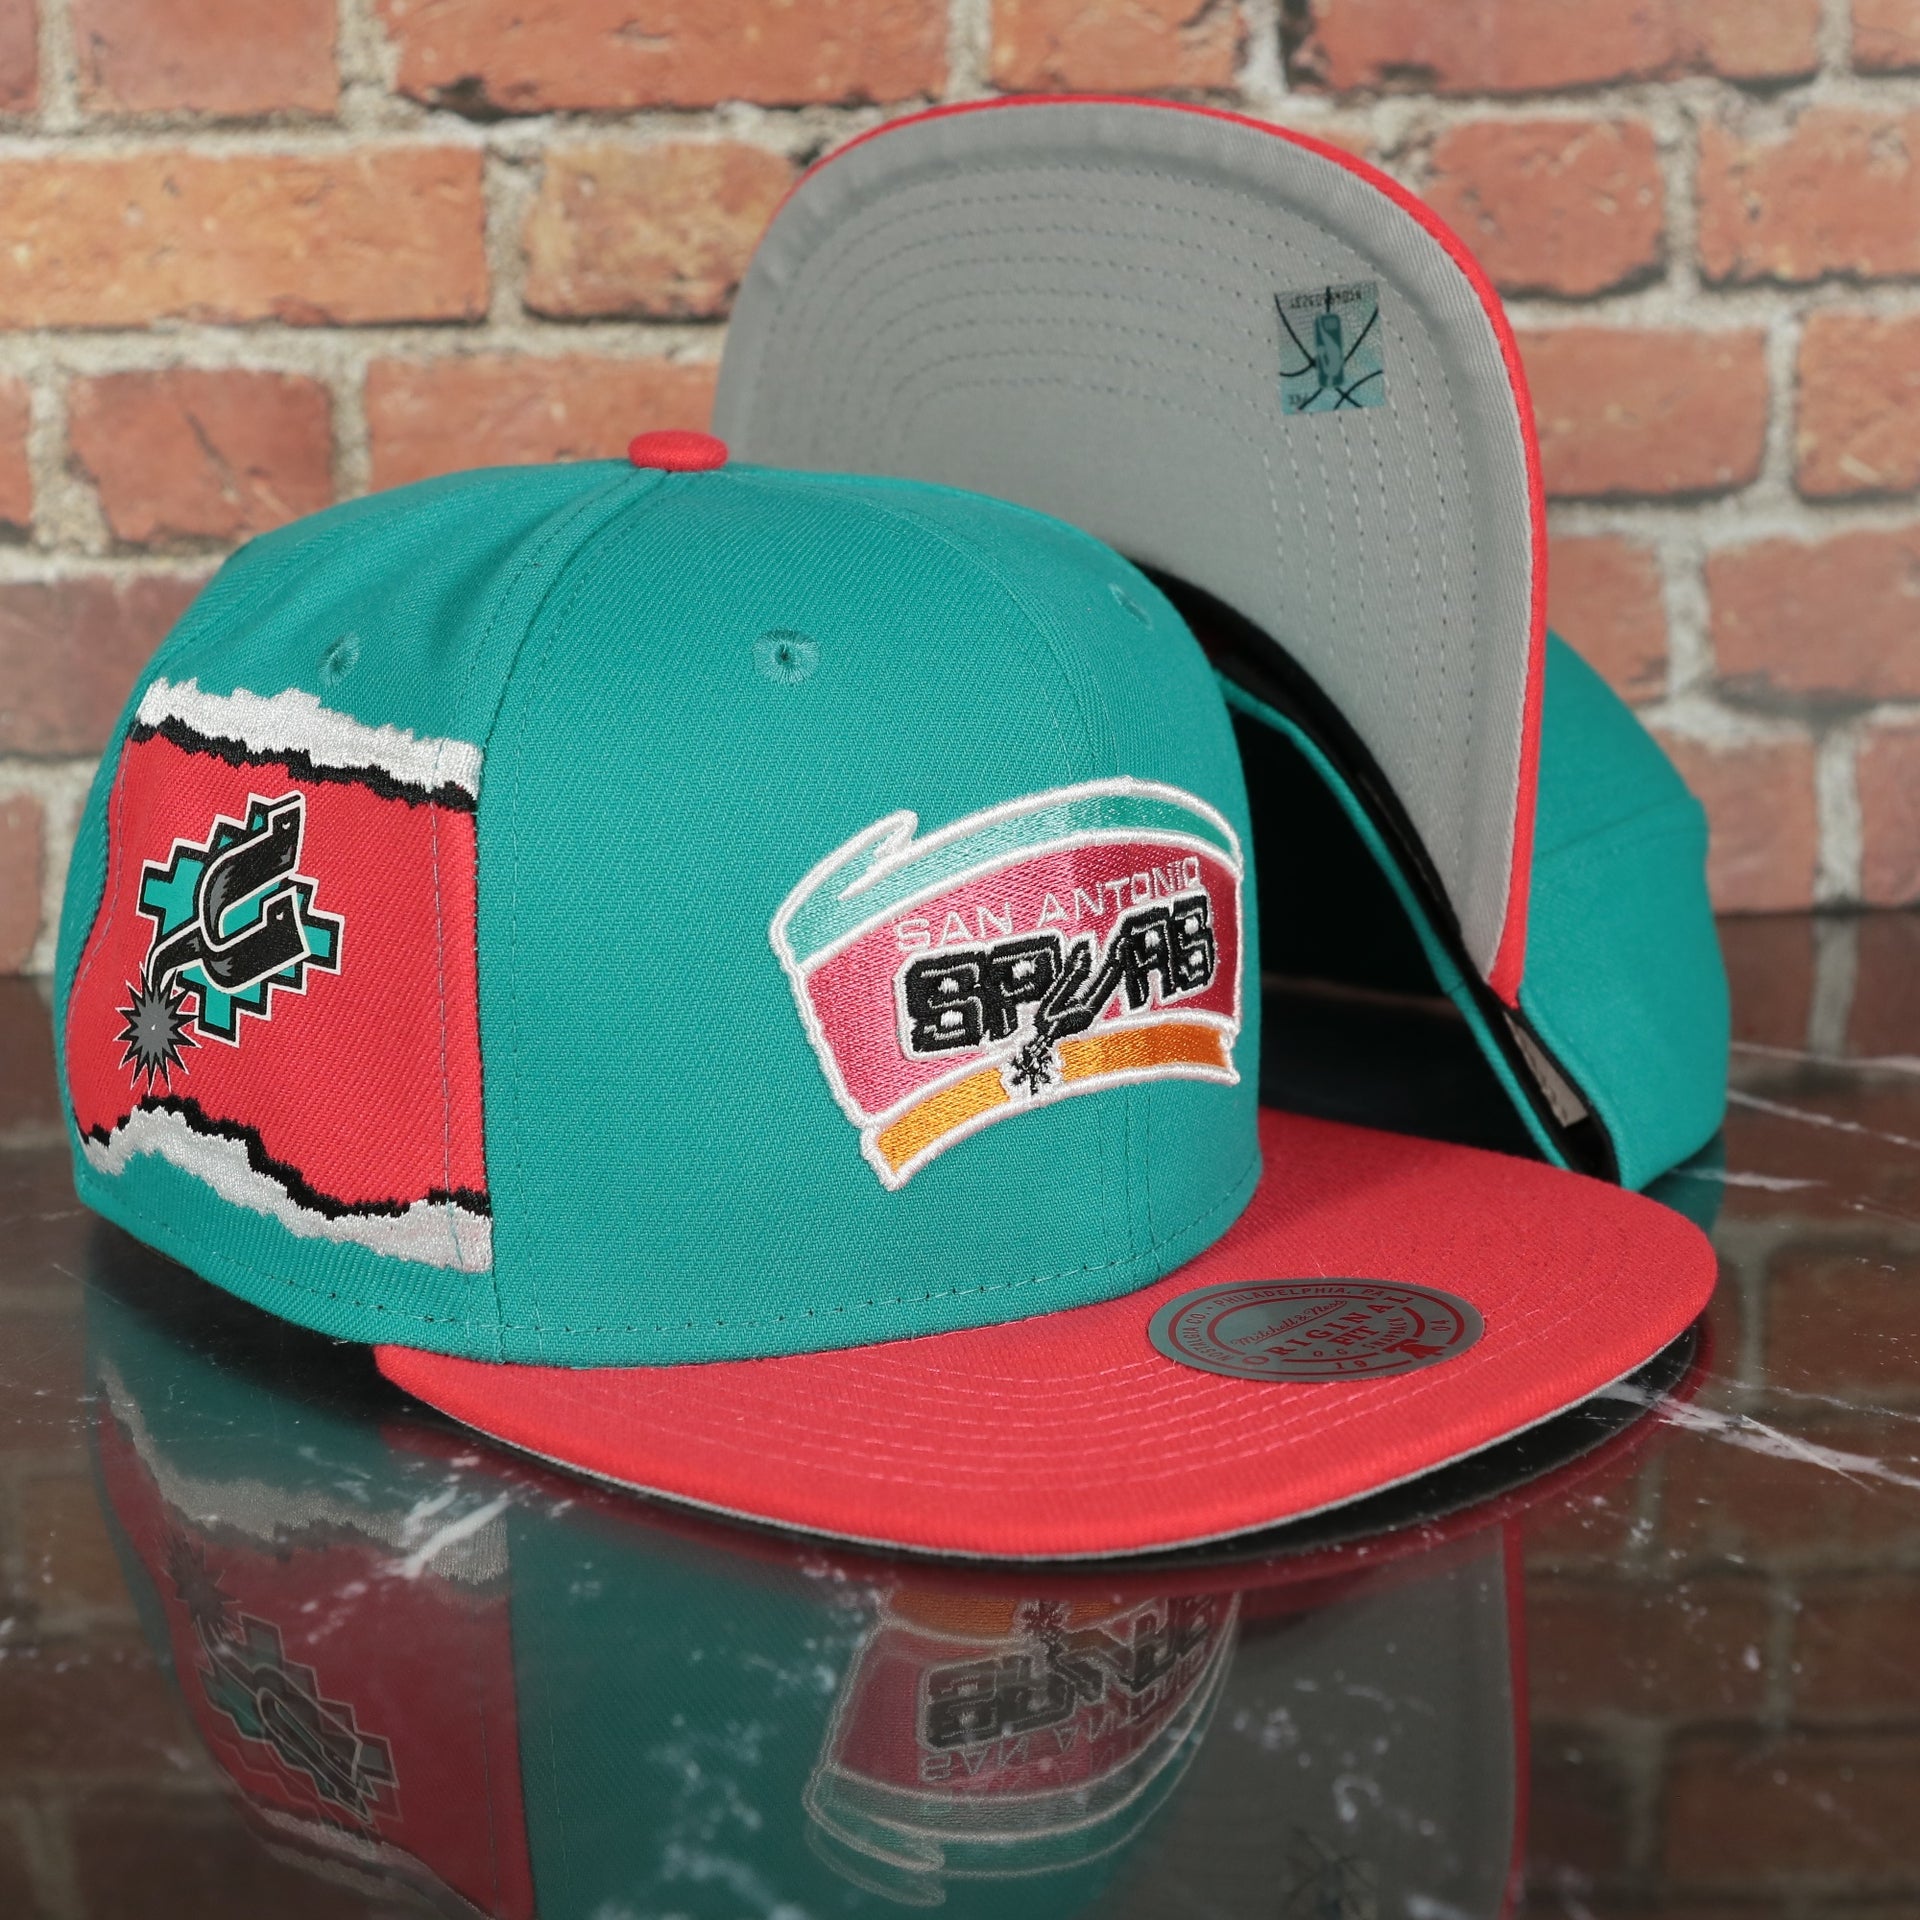 San Antonio Spurs Hardwood Classics Jumbotron Spurs Ripped Logo side patch Grey Bottom Teal/Red Snapback hat | Mitchell and Ness Two Tone Snap Cap